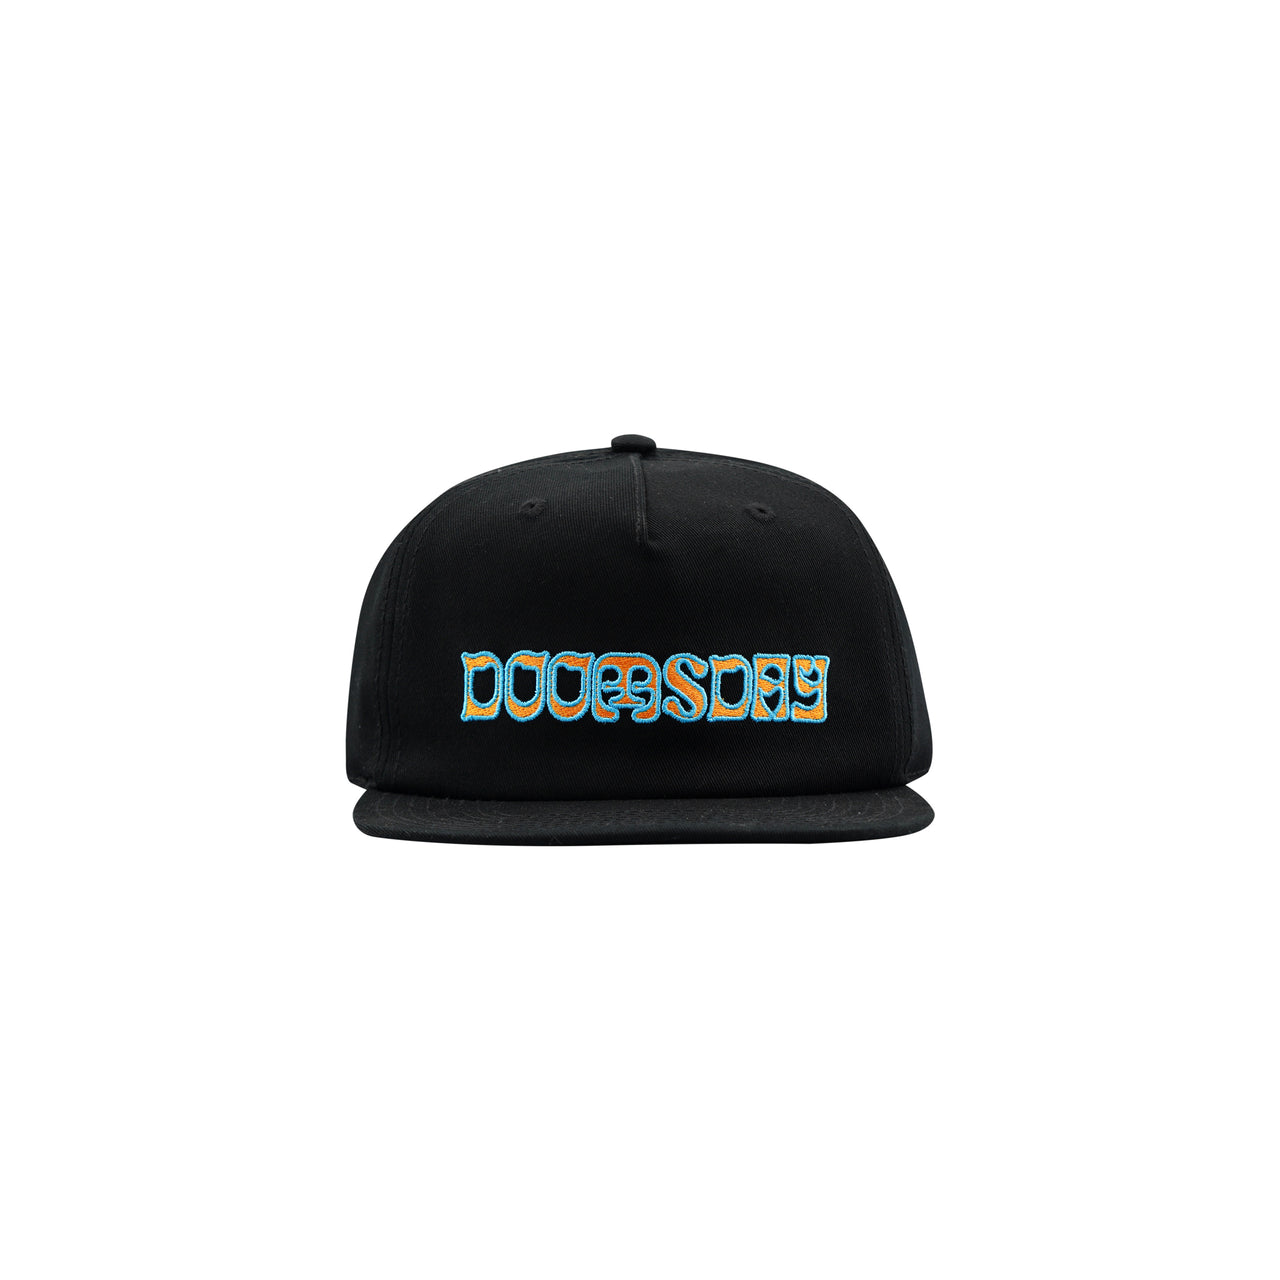 TRIPPY UNSTRUCTURED SNAPBACK